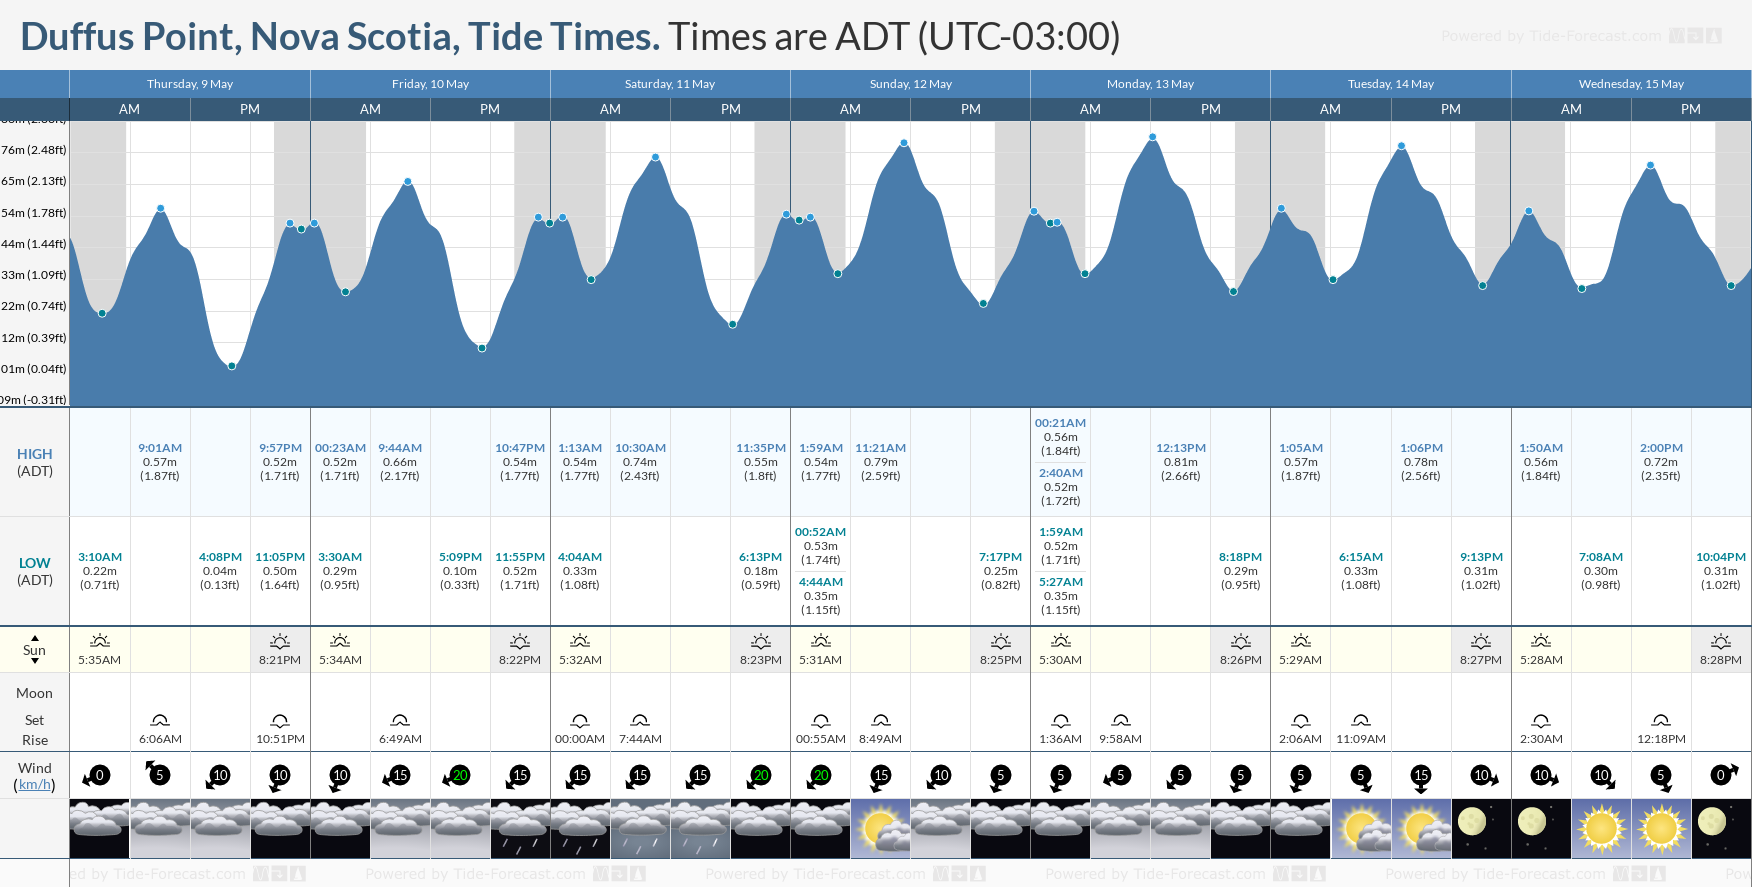 Duffus Point, Nova Scotia Tide Chart including high and low tide tide times for the next 7 days